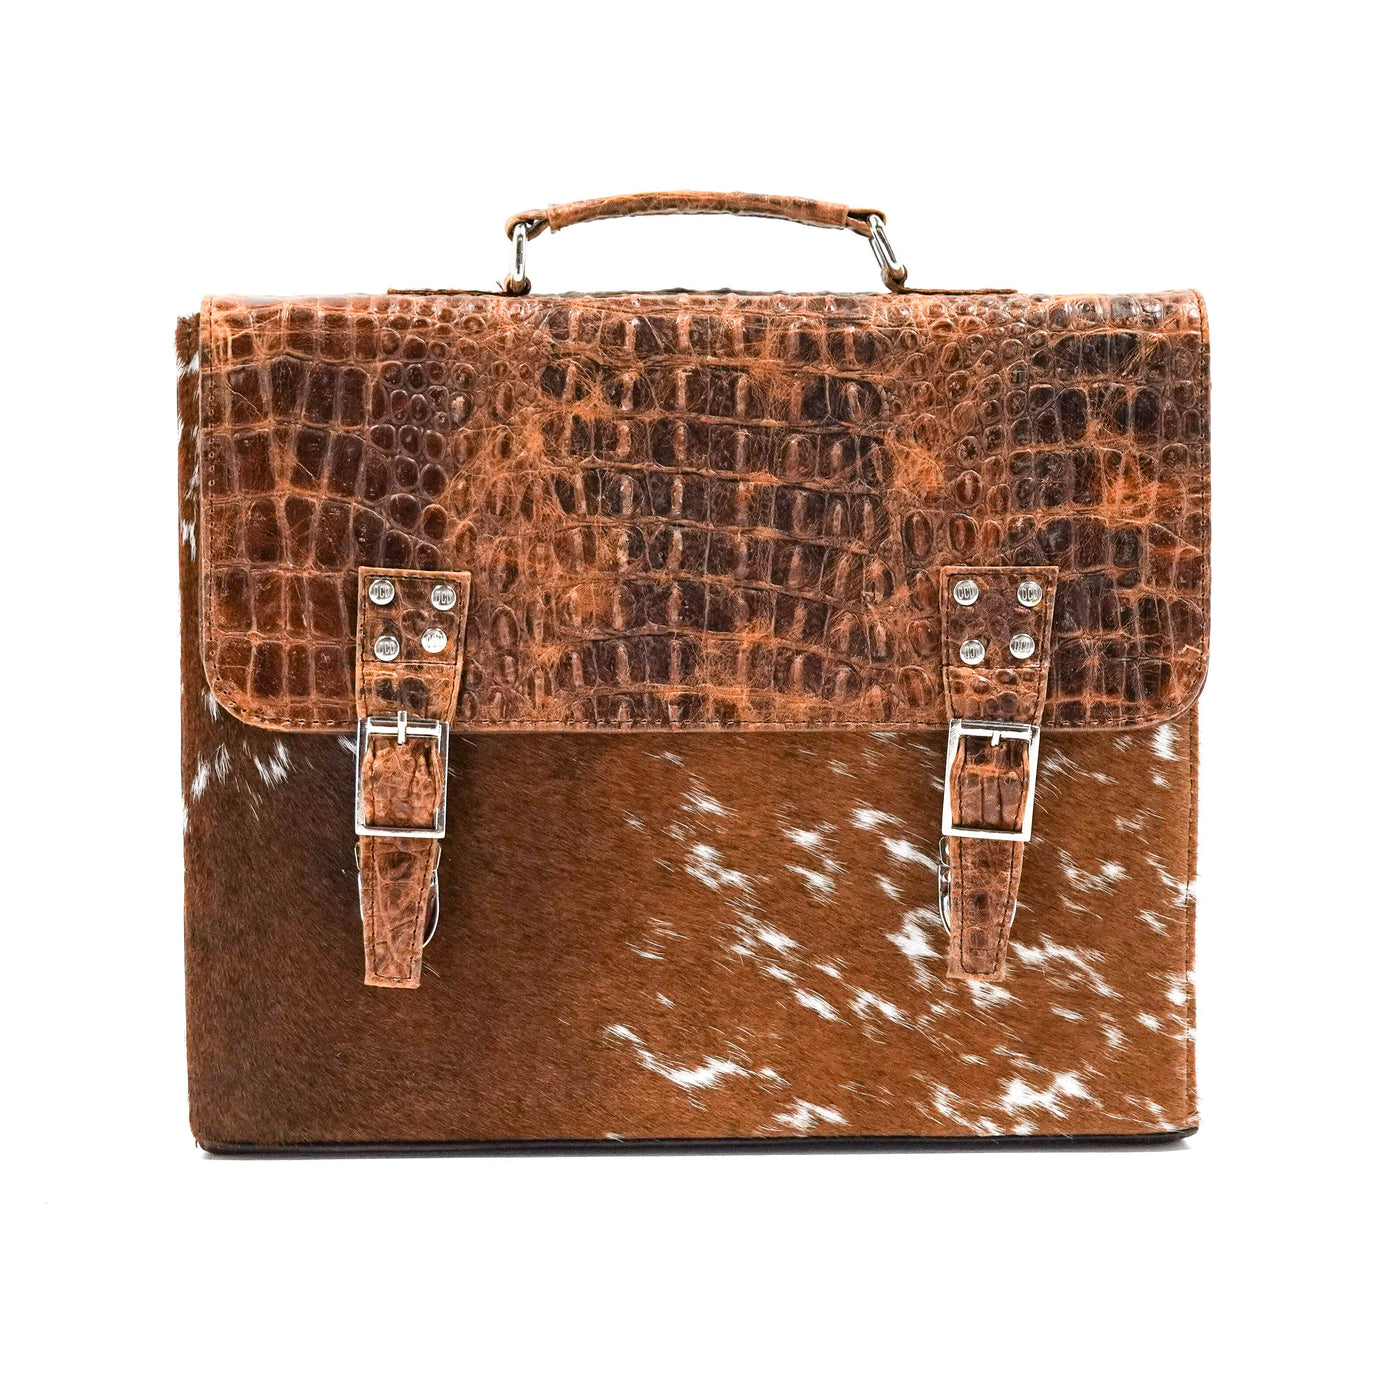 Briefcase - Longhorn w/ Saddle Croc-Briefcase-Western-Cowhide-Bags-Handmade-Products-Gifts-Dancing Cactus Designs